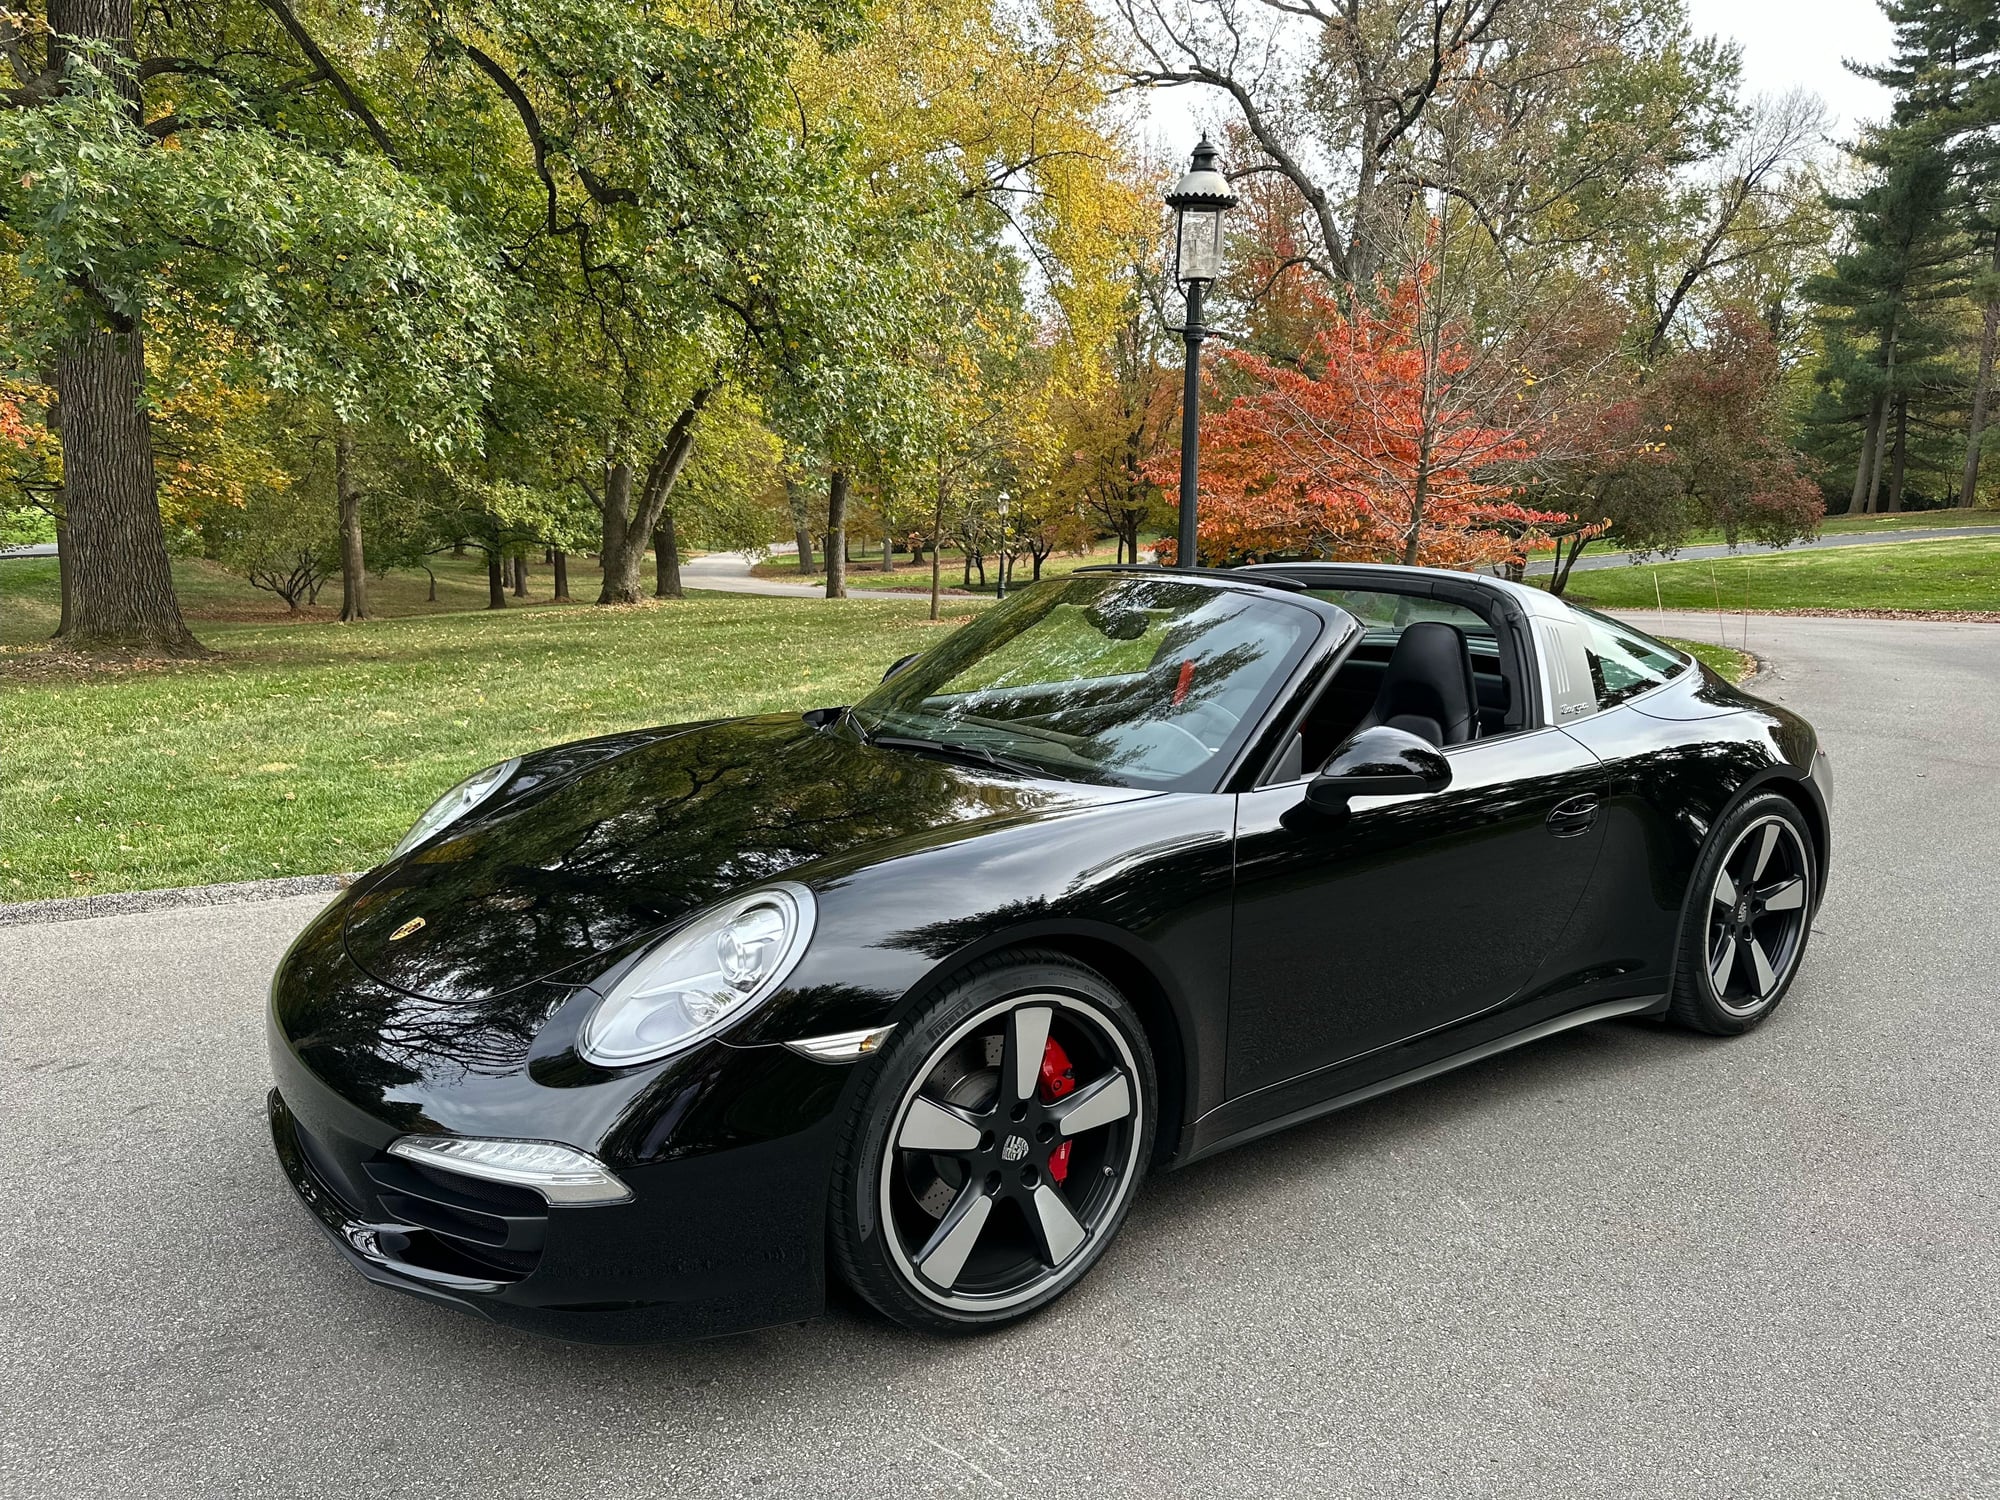 2016 Porsche 911 - 2016 911 Targa 4S - Used - VIN WP0BB2A9XGS136694 - 6 cyl - 4WD - Manual - Coupe - Black - St. Louis, MO 63130, United States